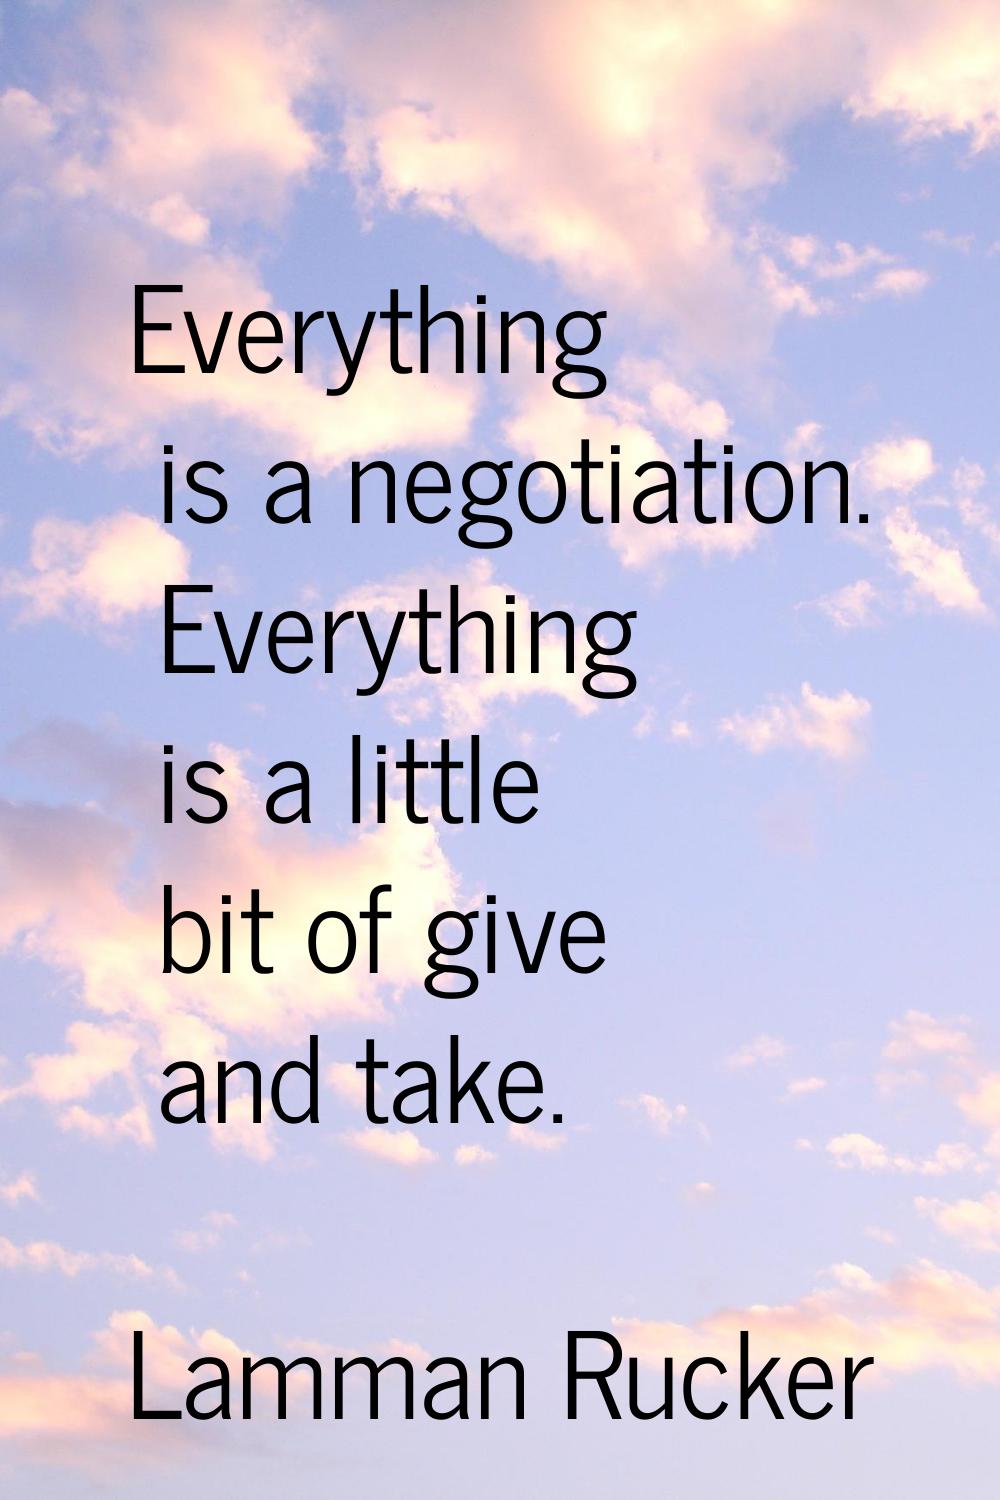 Everything is a negotiation. Everything is a little bit of give and take.